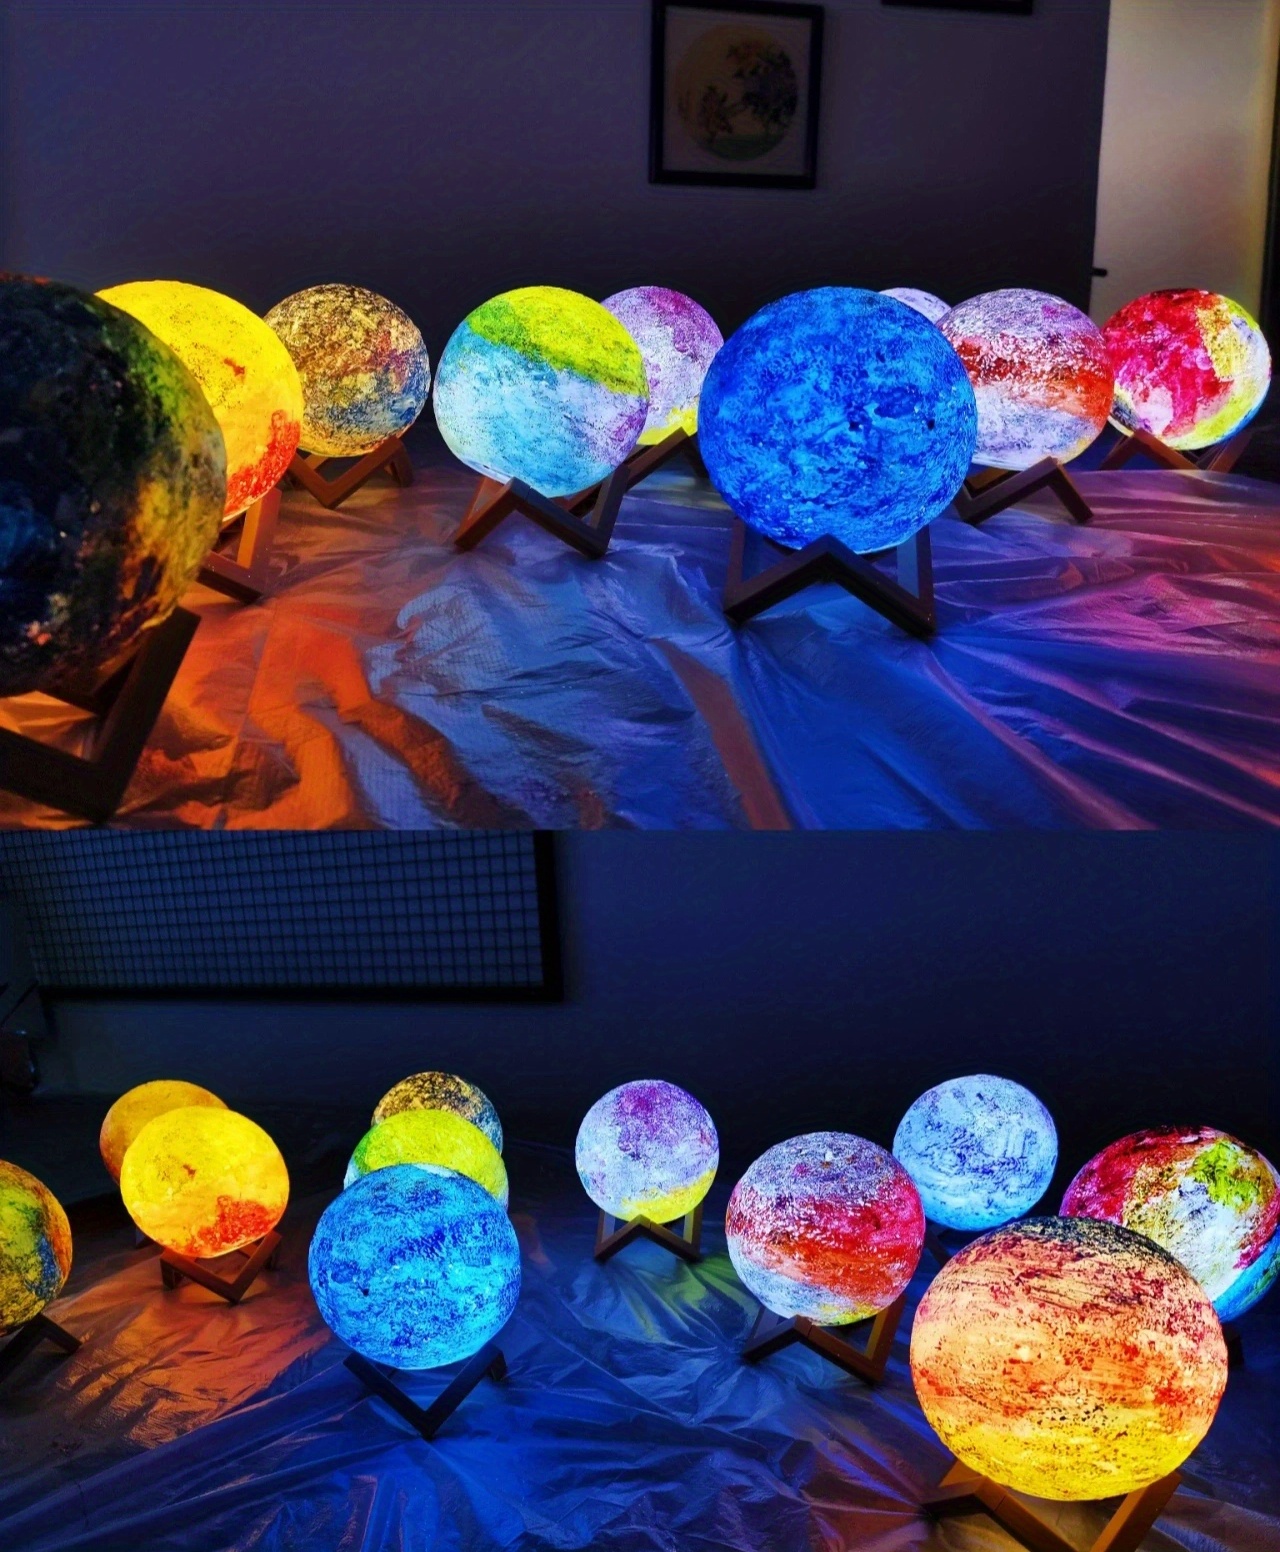 Paint Your Own Moon Lamp Kit, Arts and Crafts for Kids Ages 8-12, Crafts DIY